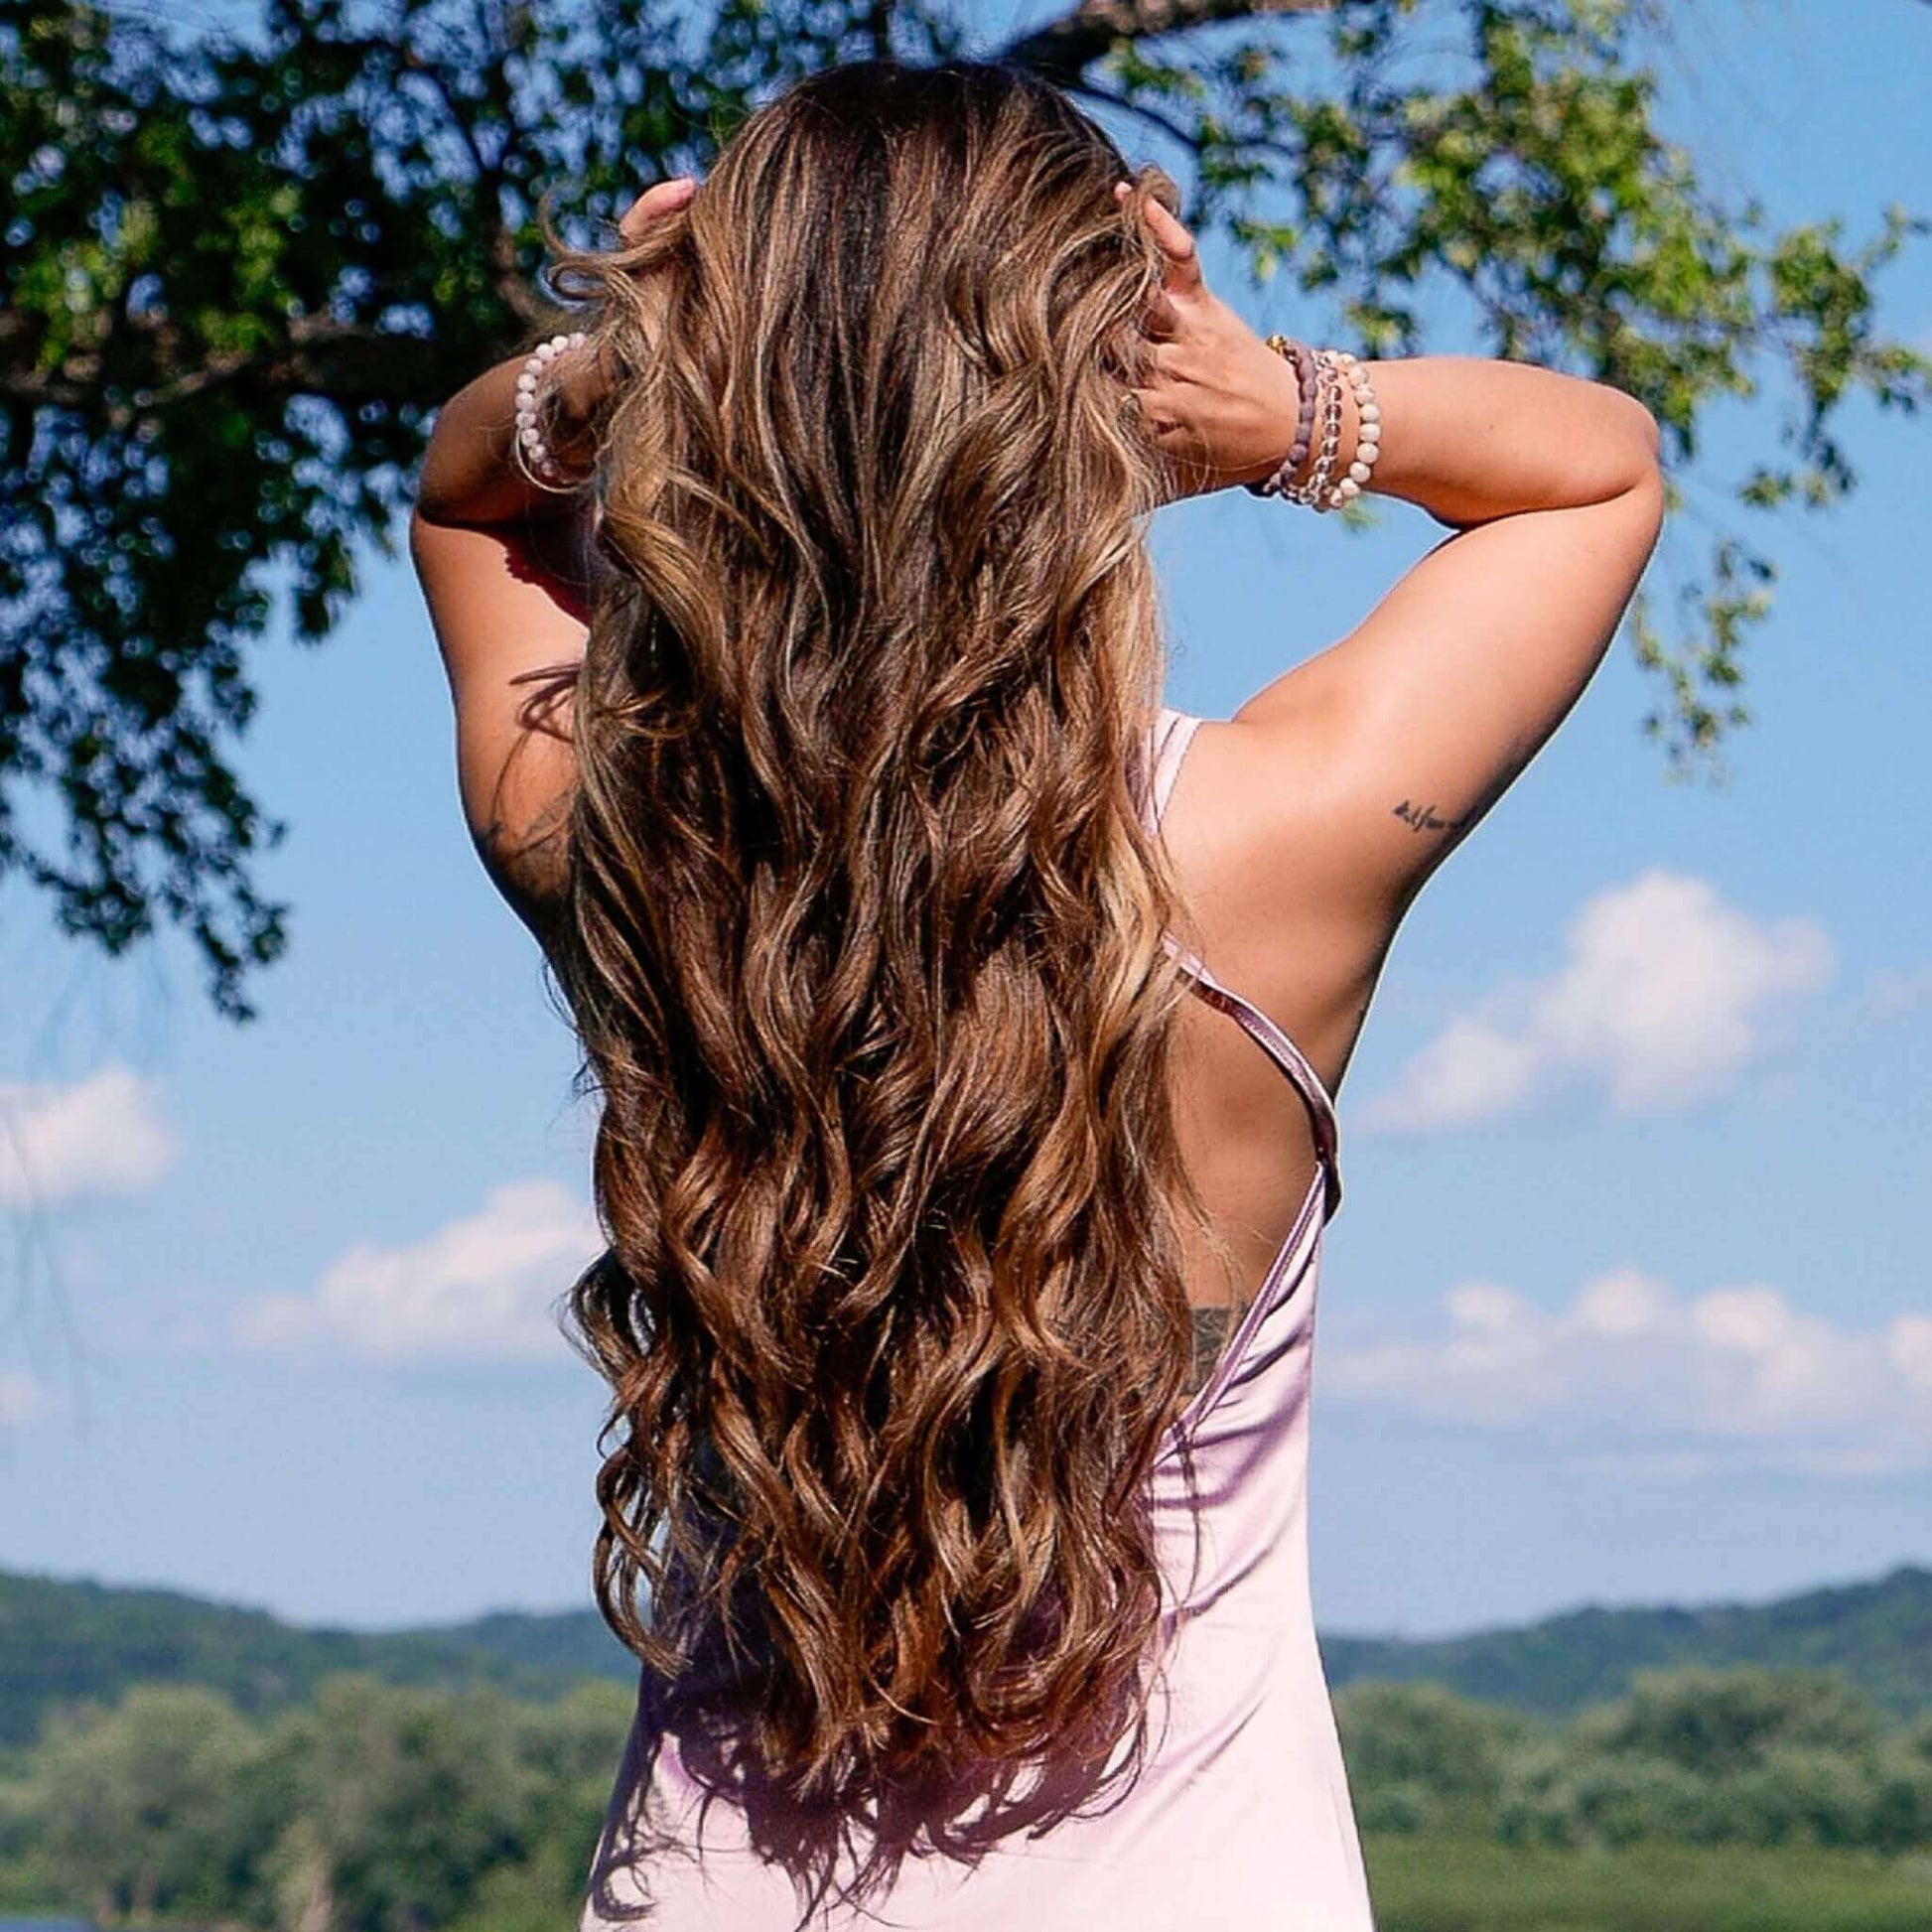 Woman with beautiful long hair curled by the TYME Iron Air.